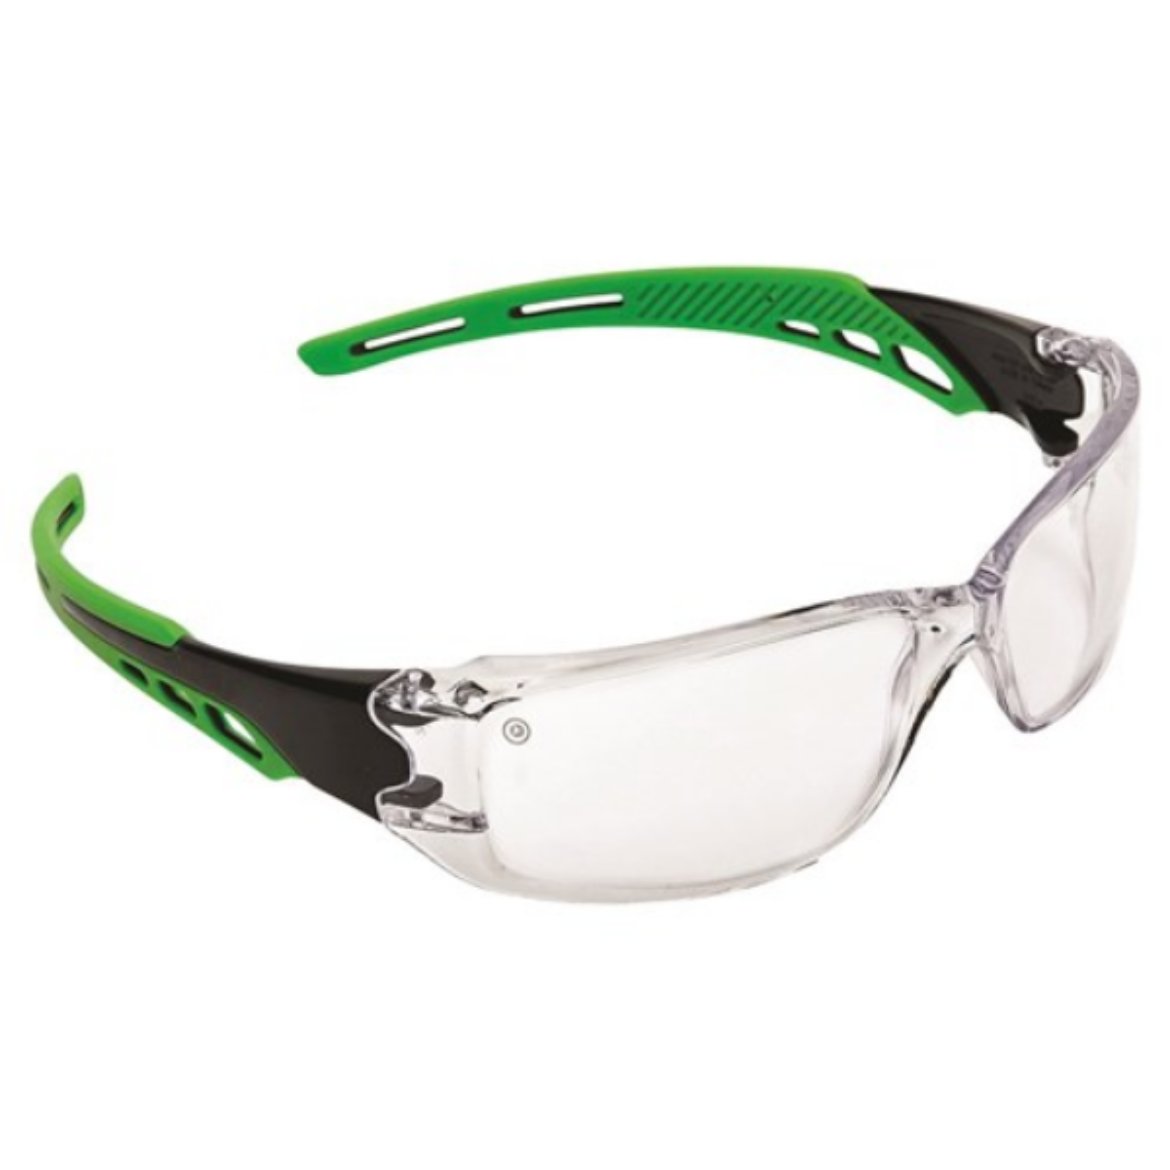 Picture of CIRRUS - CLEAR LENS, ANTI-FOG, POLYCARBONATE FRAME SAFETY GLASSES WITH SOFT GREEN ARMS